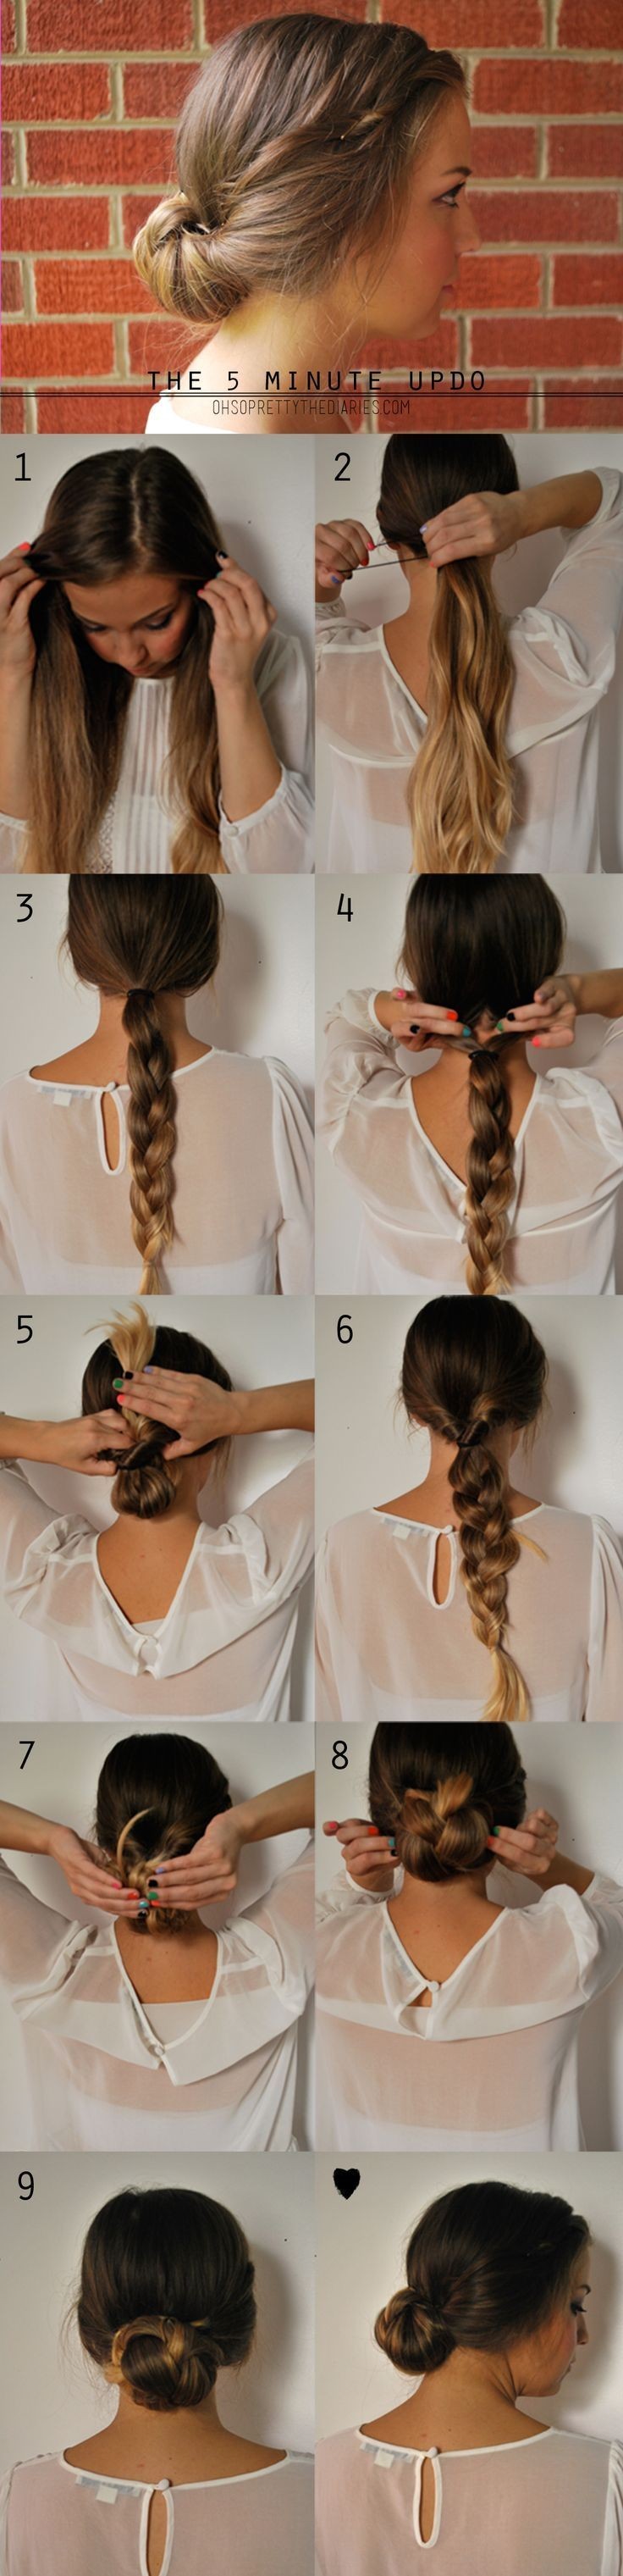 5 minutes updo for long hair